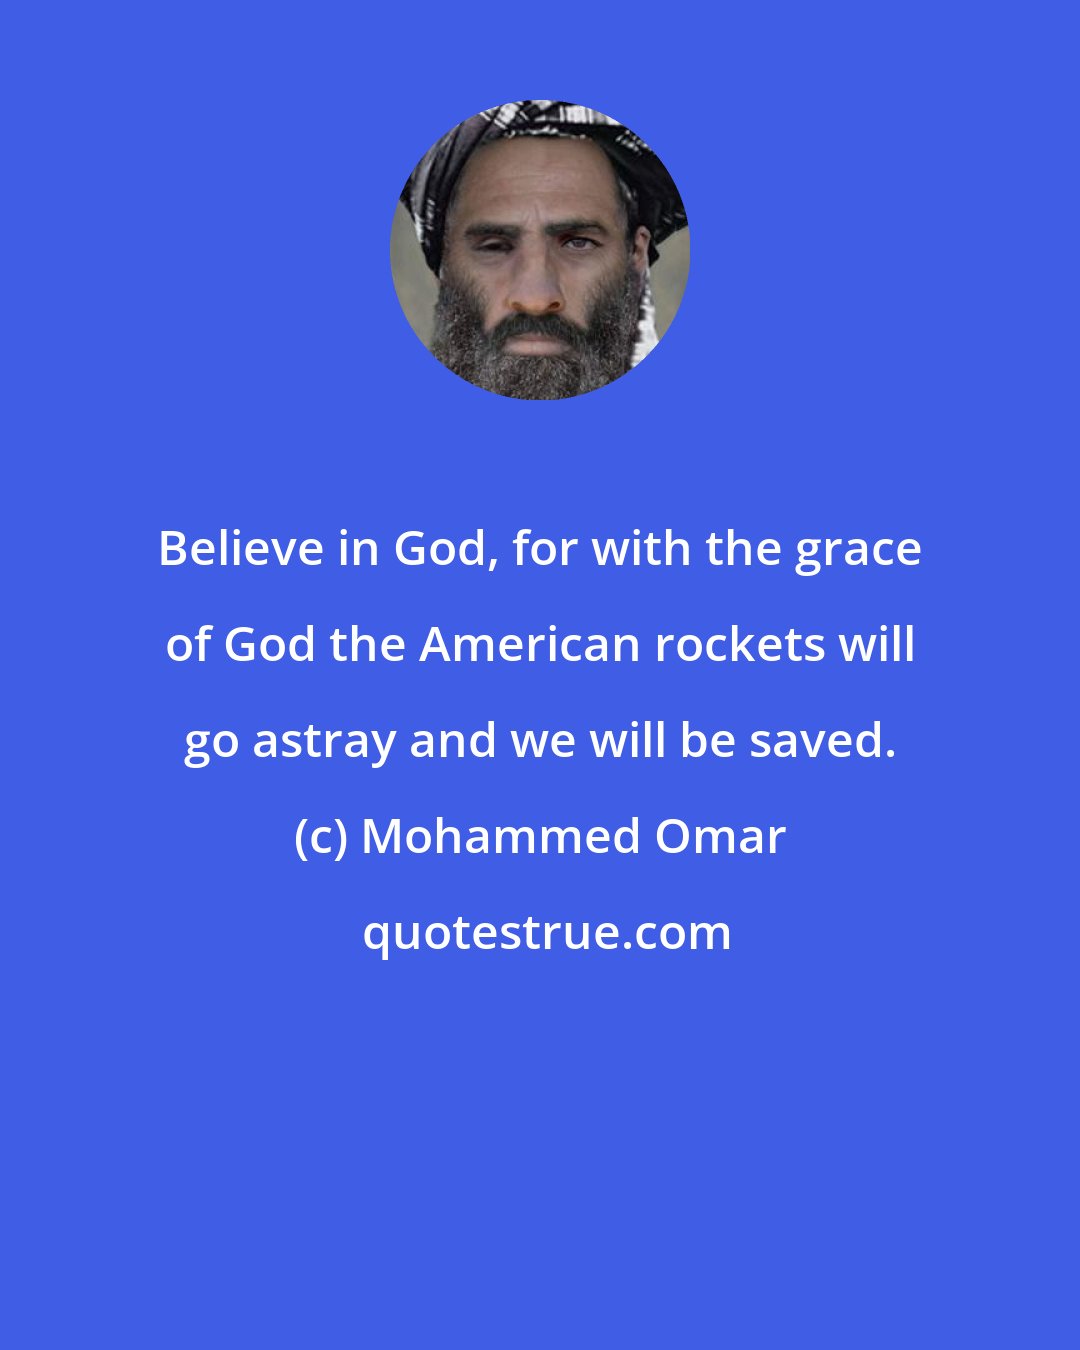 Mohammed Omar: Believe in God, for with the grace of God the American rockets will go astray and we will be saved.